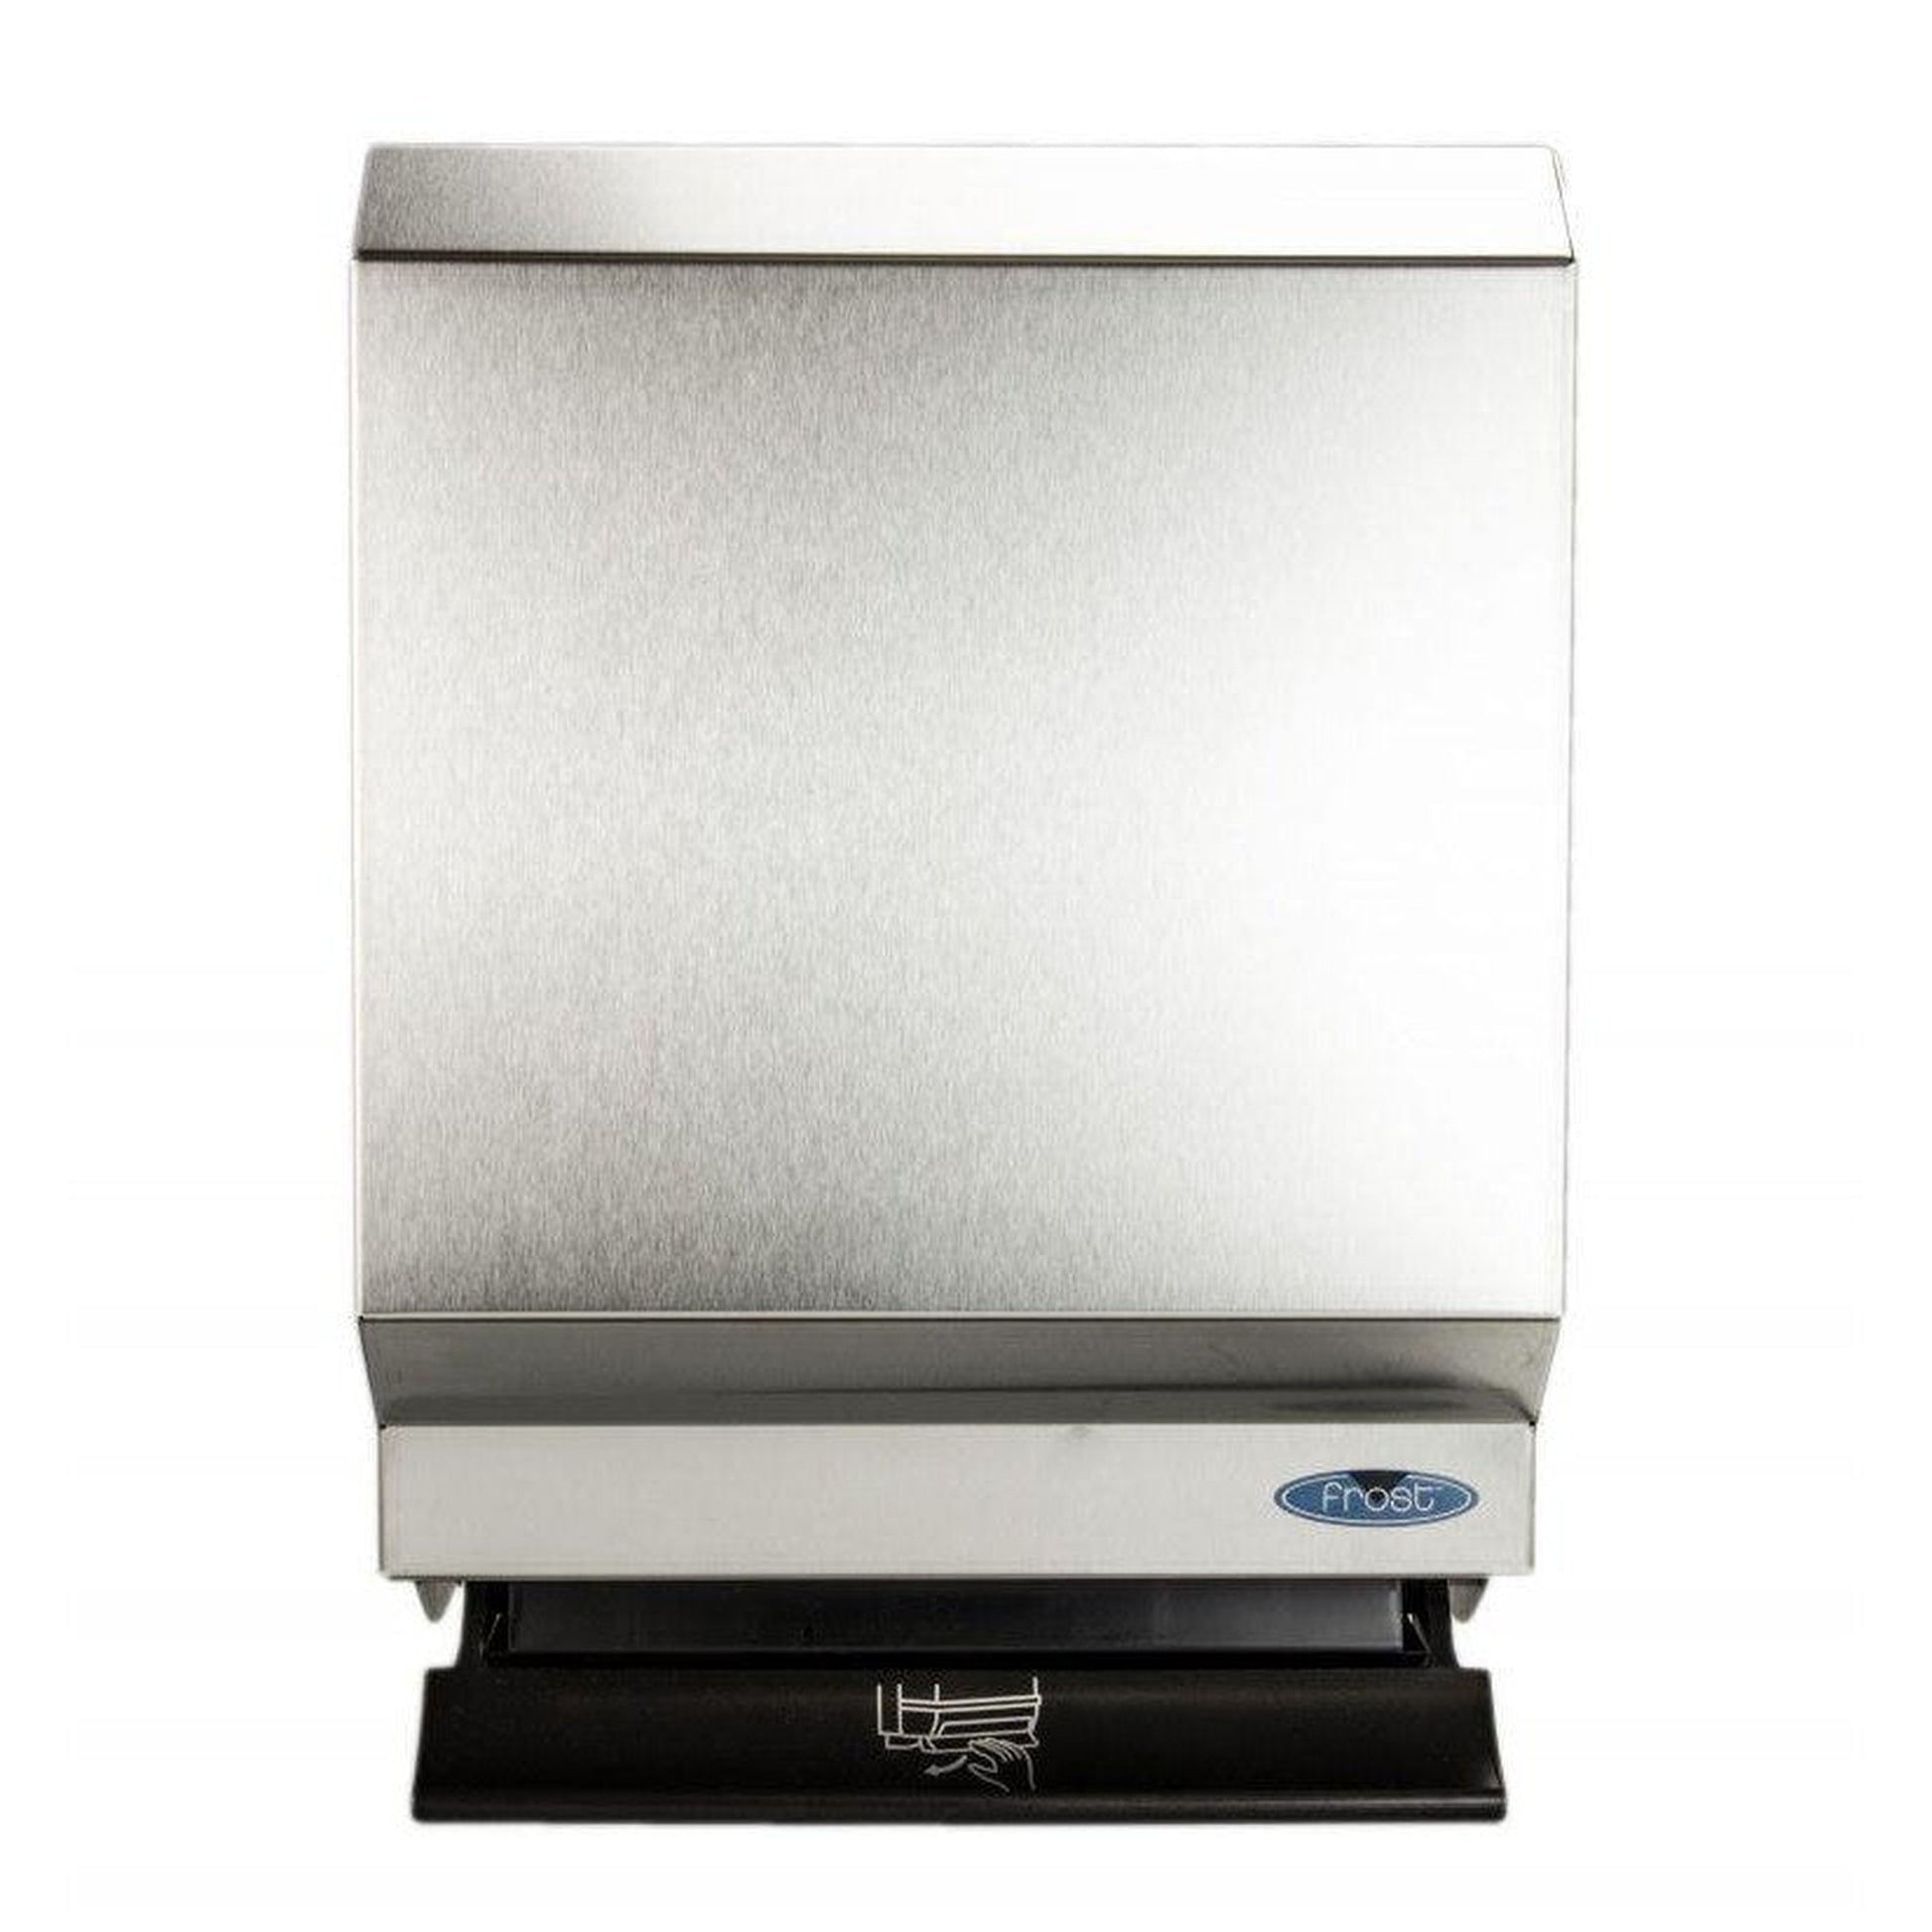 Frost 10.8 x 15.8 x 8.75 Stainless Steel Satin Paper Product Dispenser